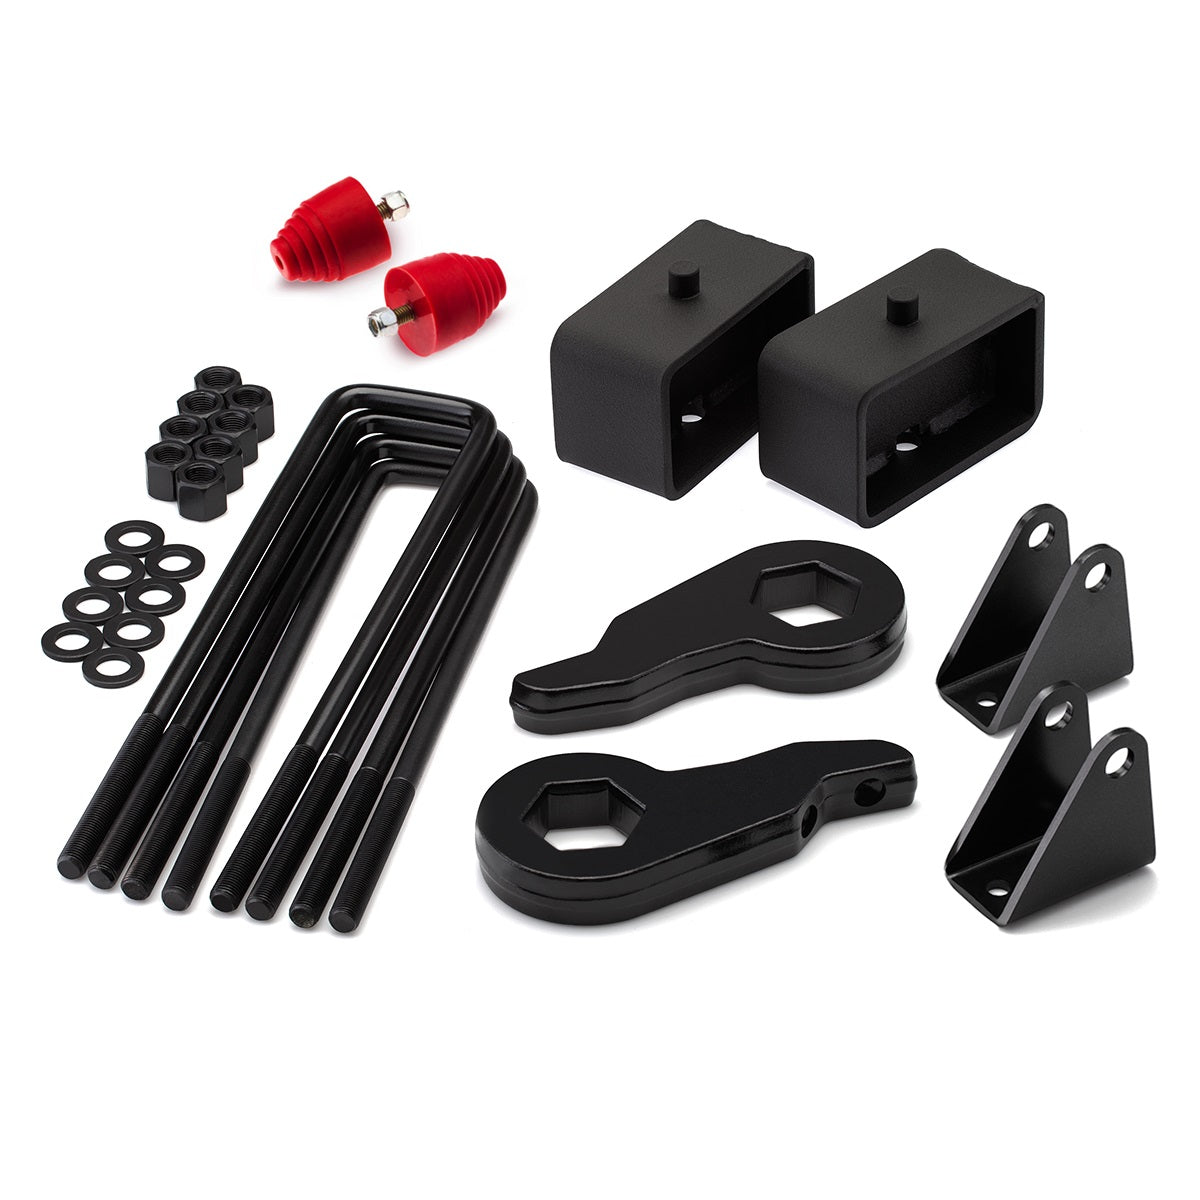 2001-2010 Chevy Silverado 1500HD Full Lift Kit with Bump Stops and Shock Extender Brackets